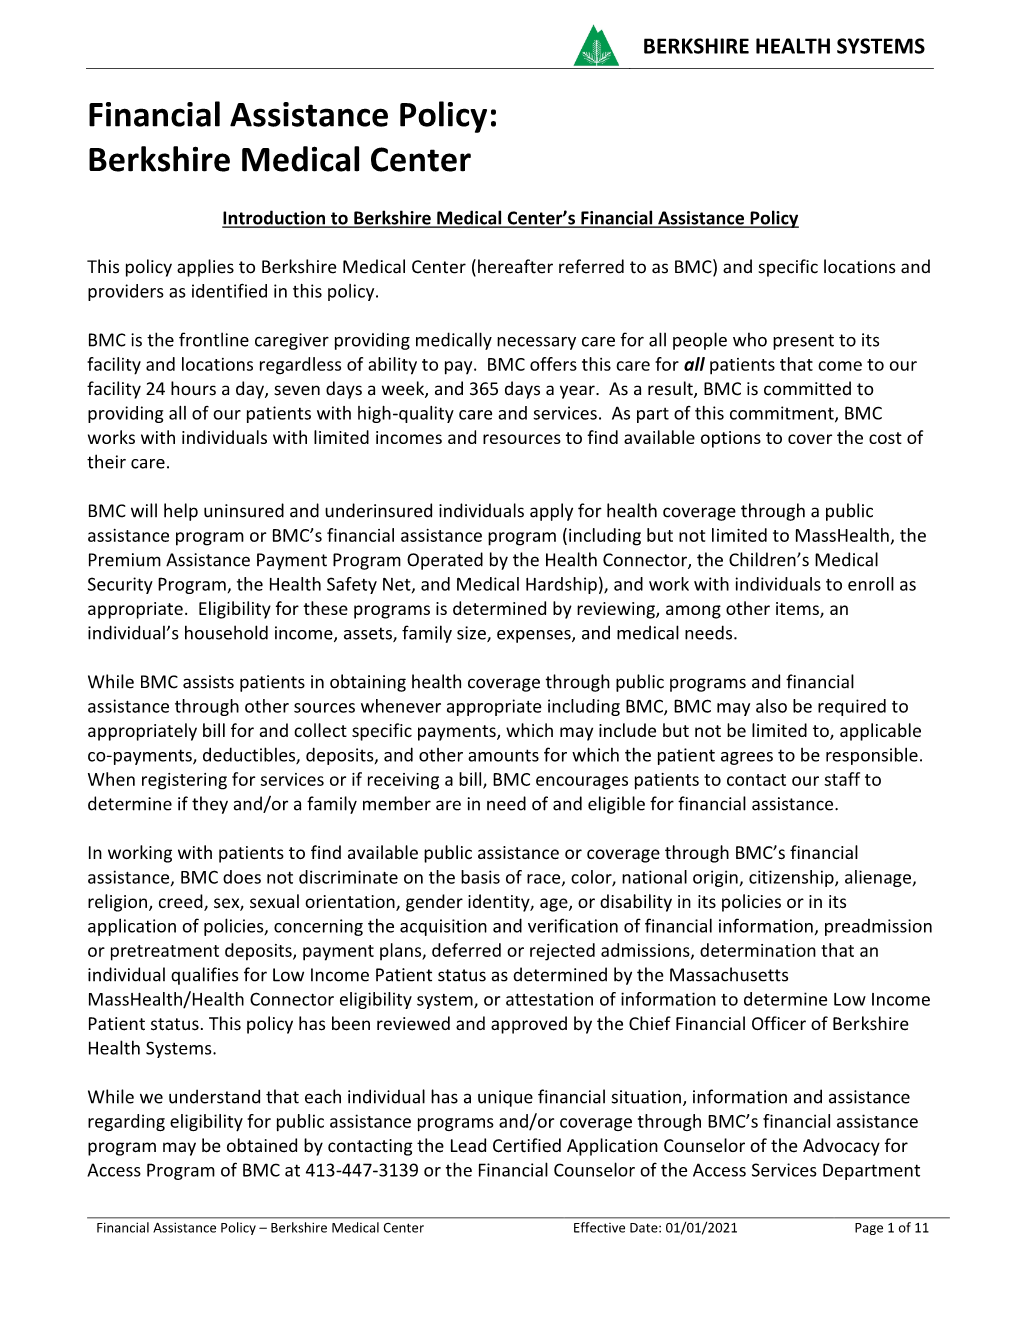 Financial Assistance Policy: Berkshire Medical Center